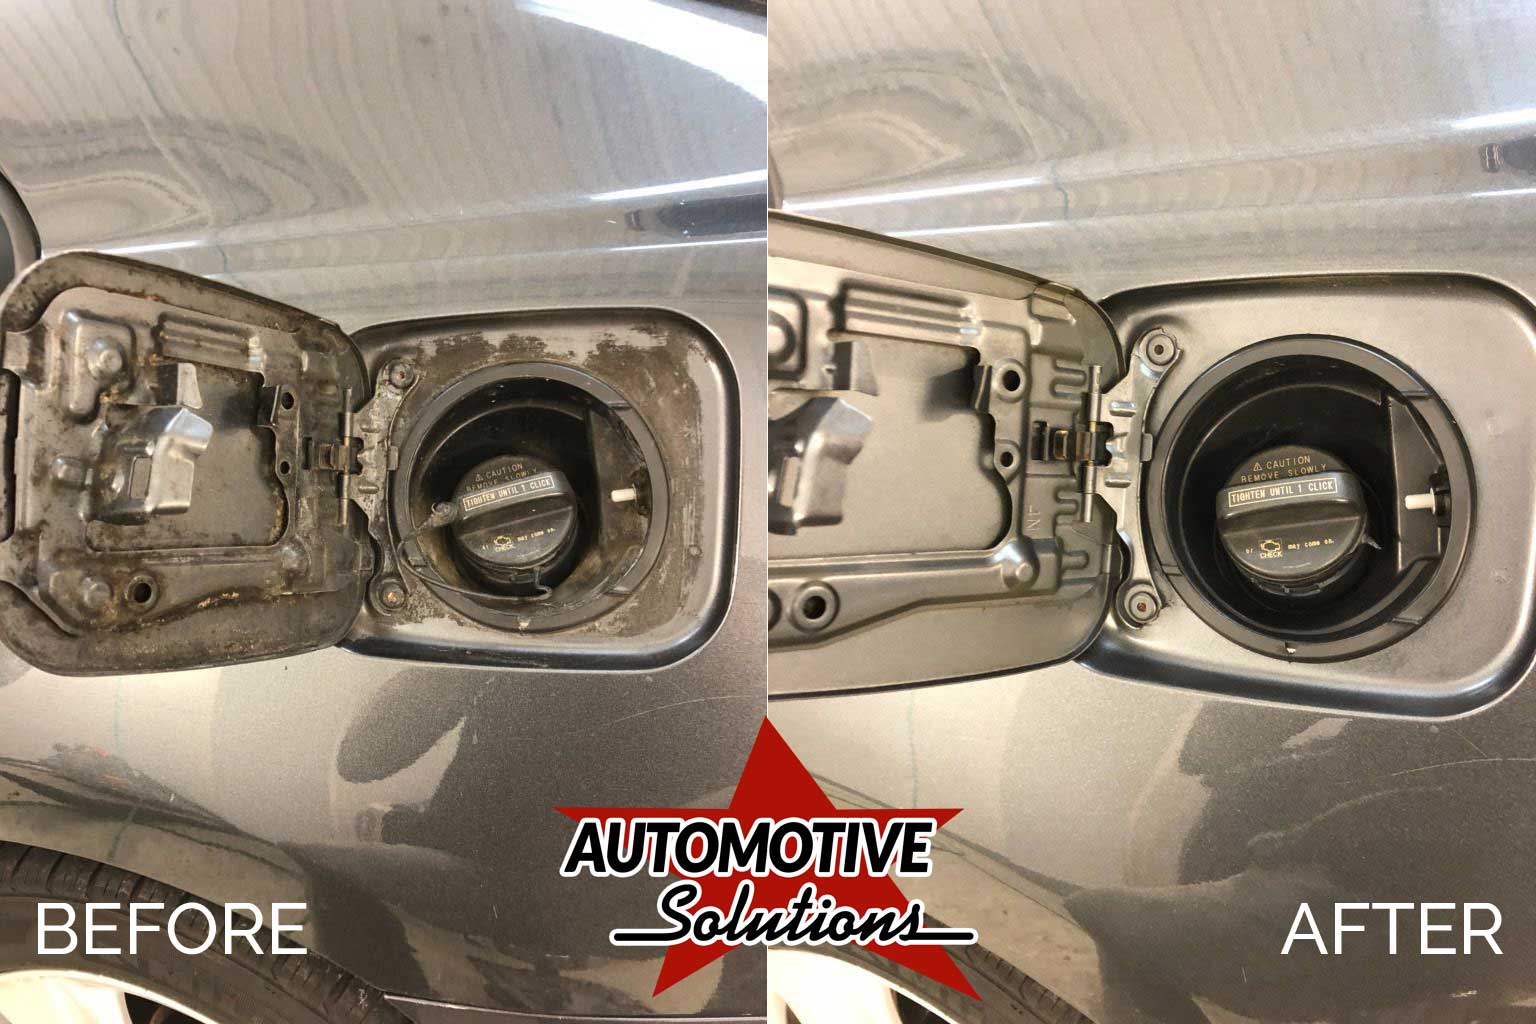 Complete auto cleaning and degreasing.